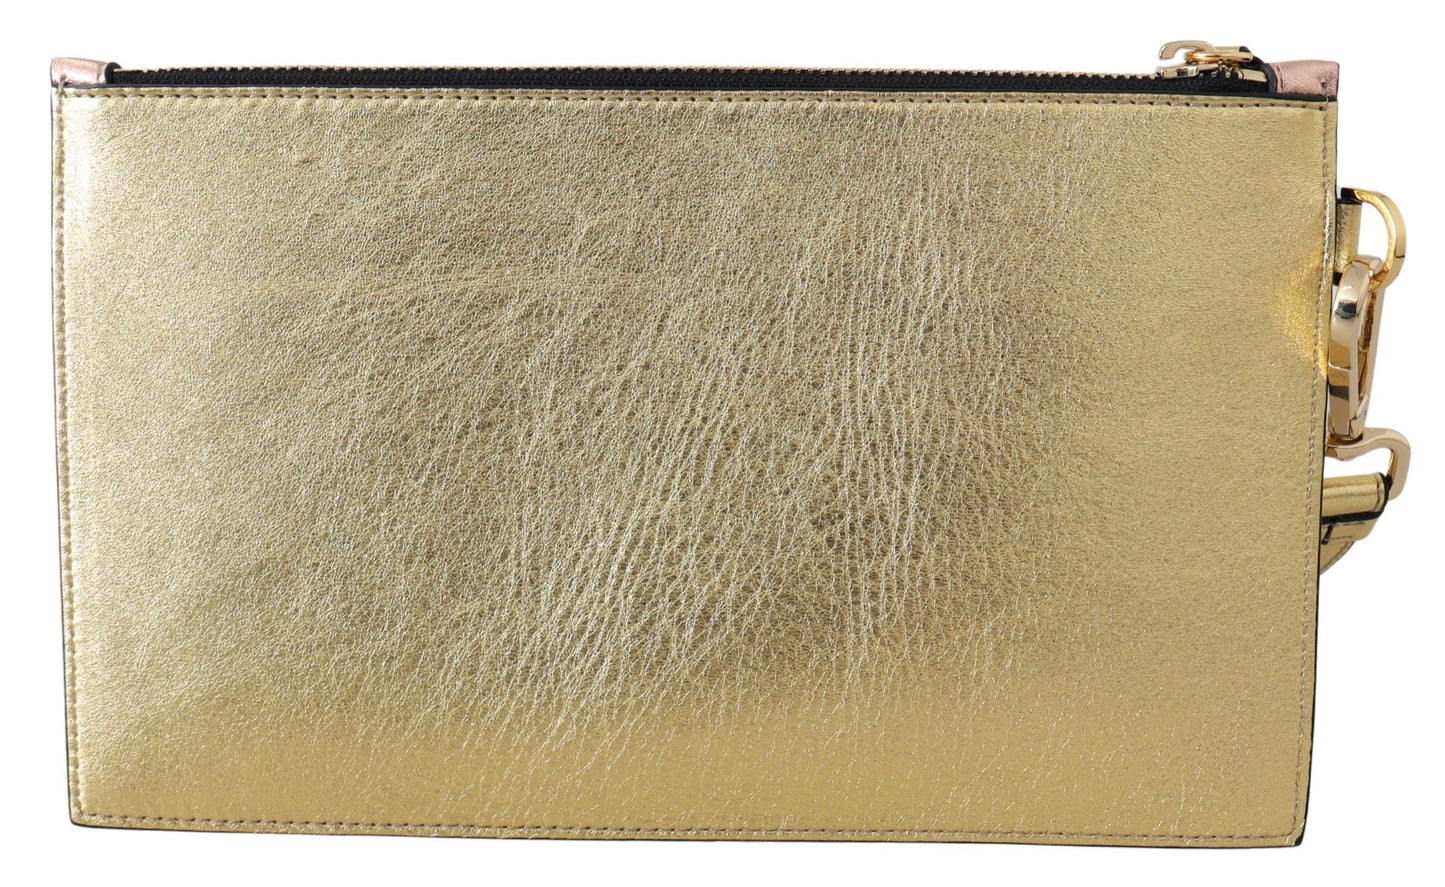 Bronze Leather Zip Small Pouch Bag